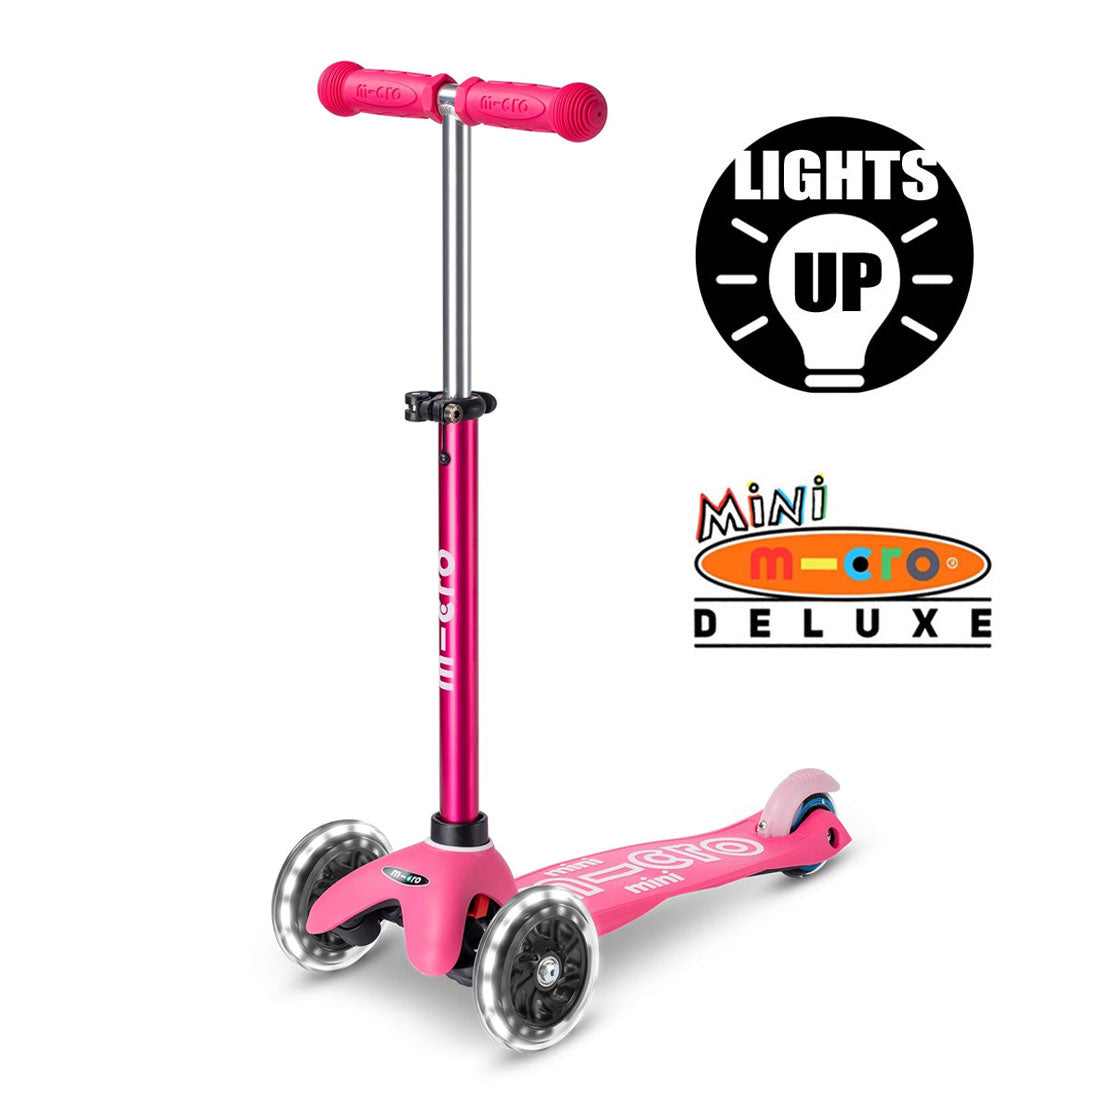 Micro Mini Deluxe LED Scooter - Pink Scooter Completes Rec